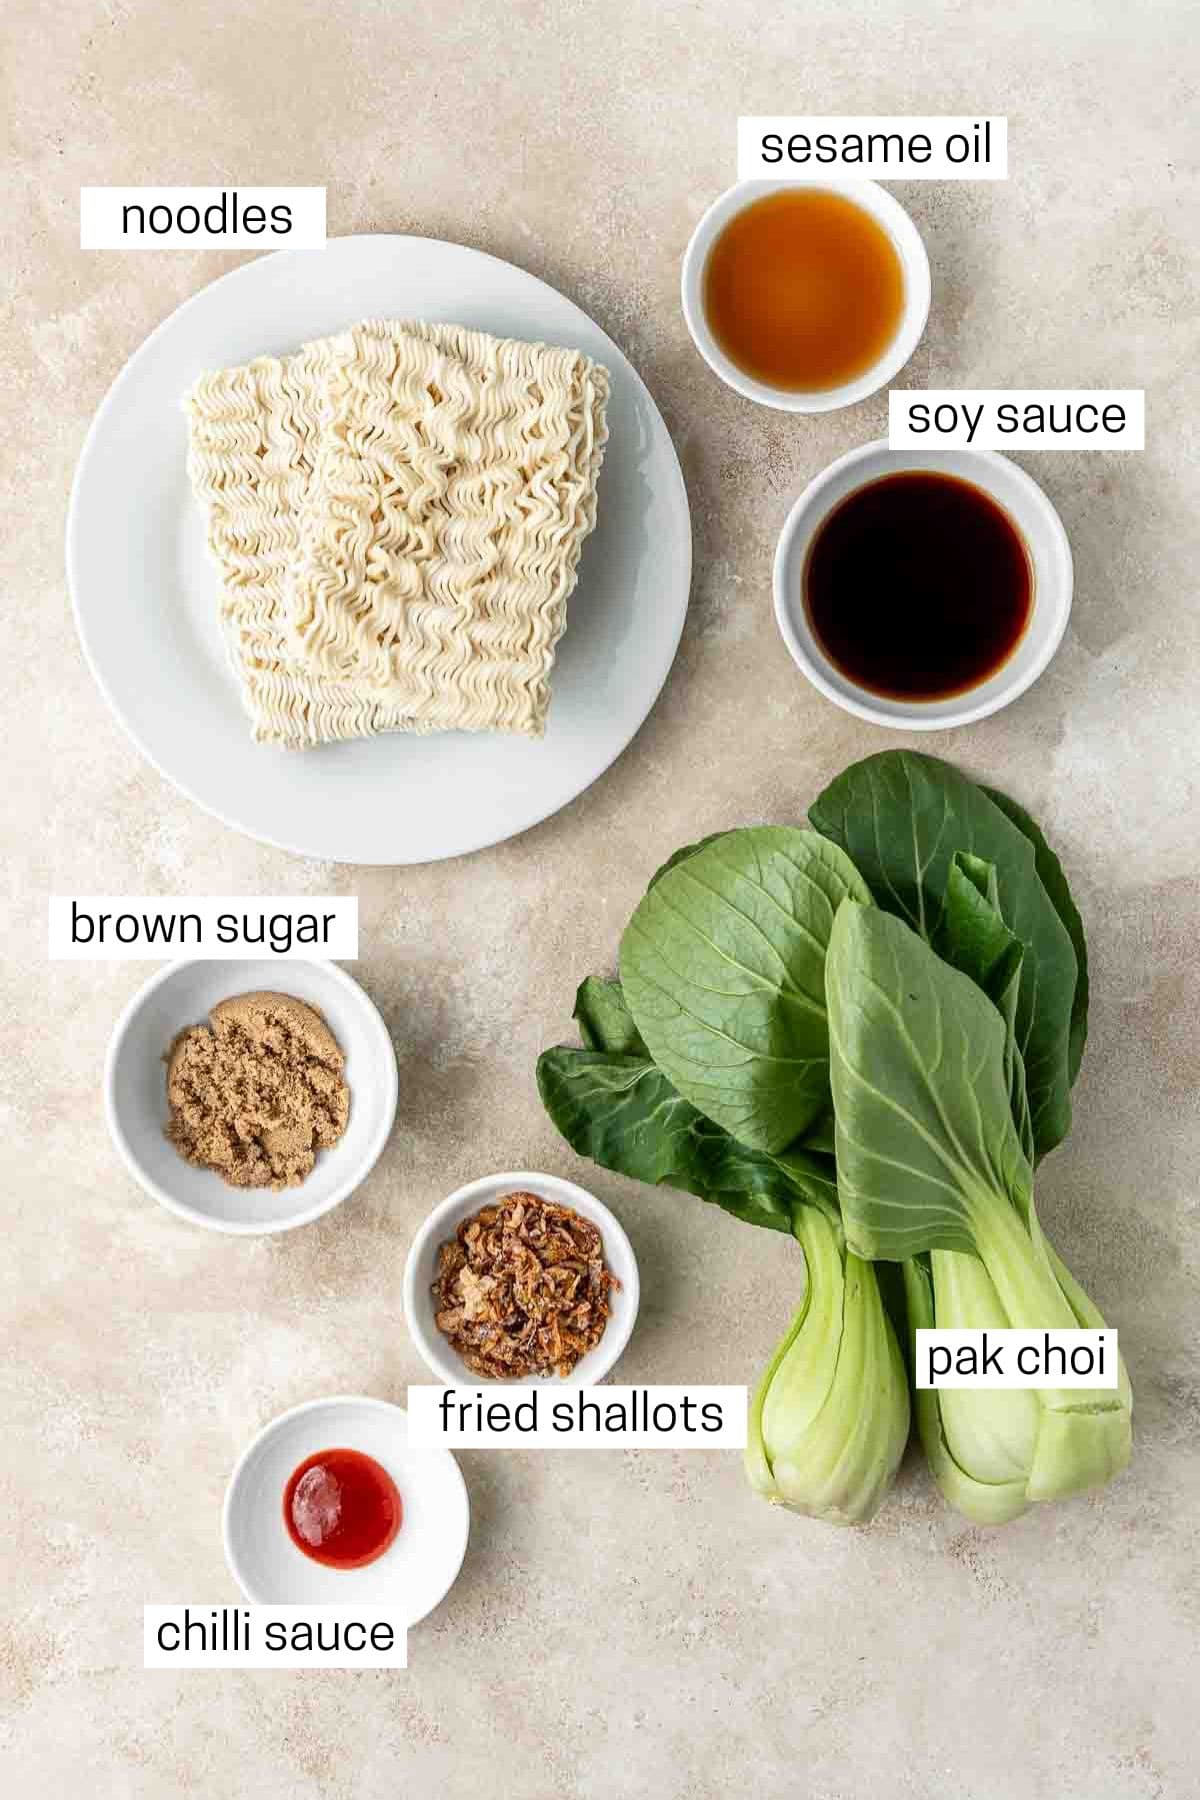 All ingredients needed to make sweet and spicy noodles in small bowls.